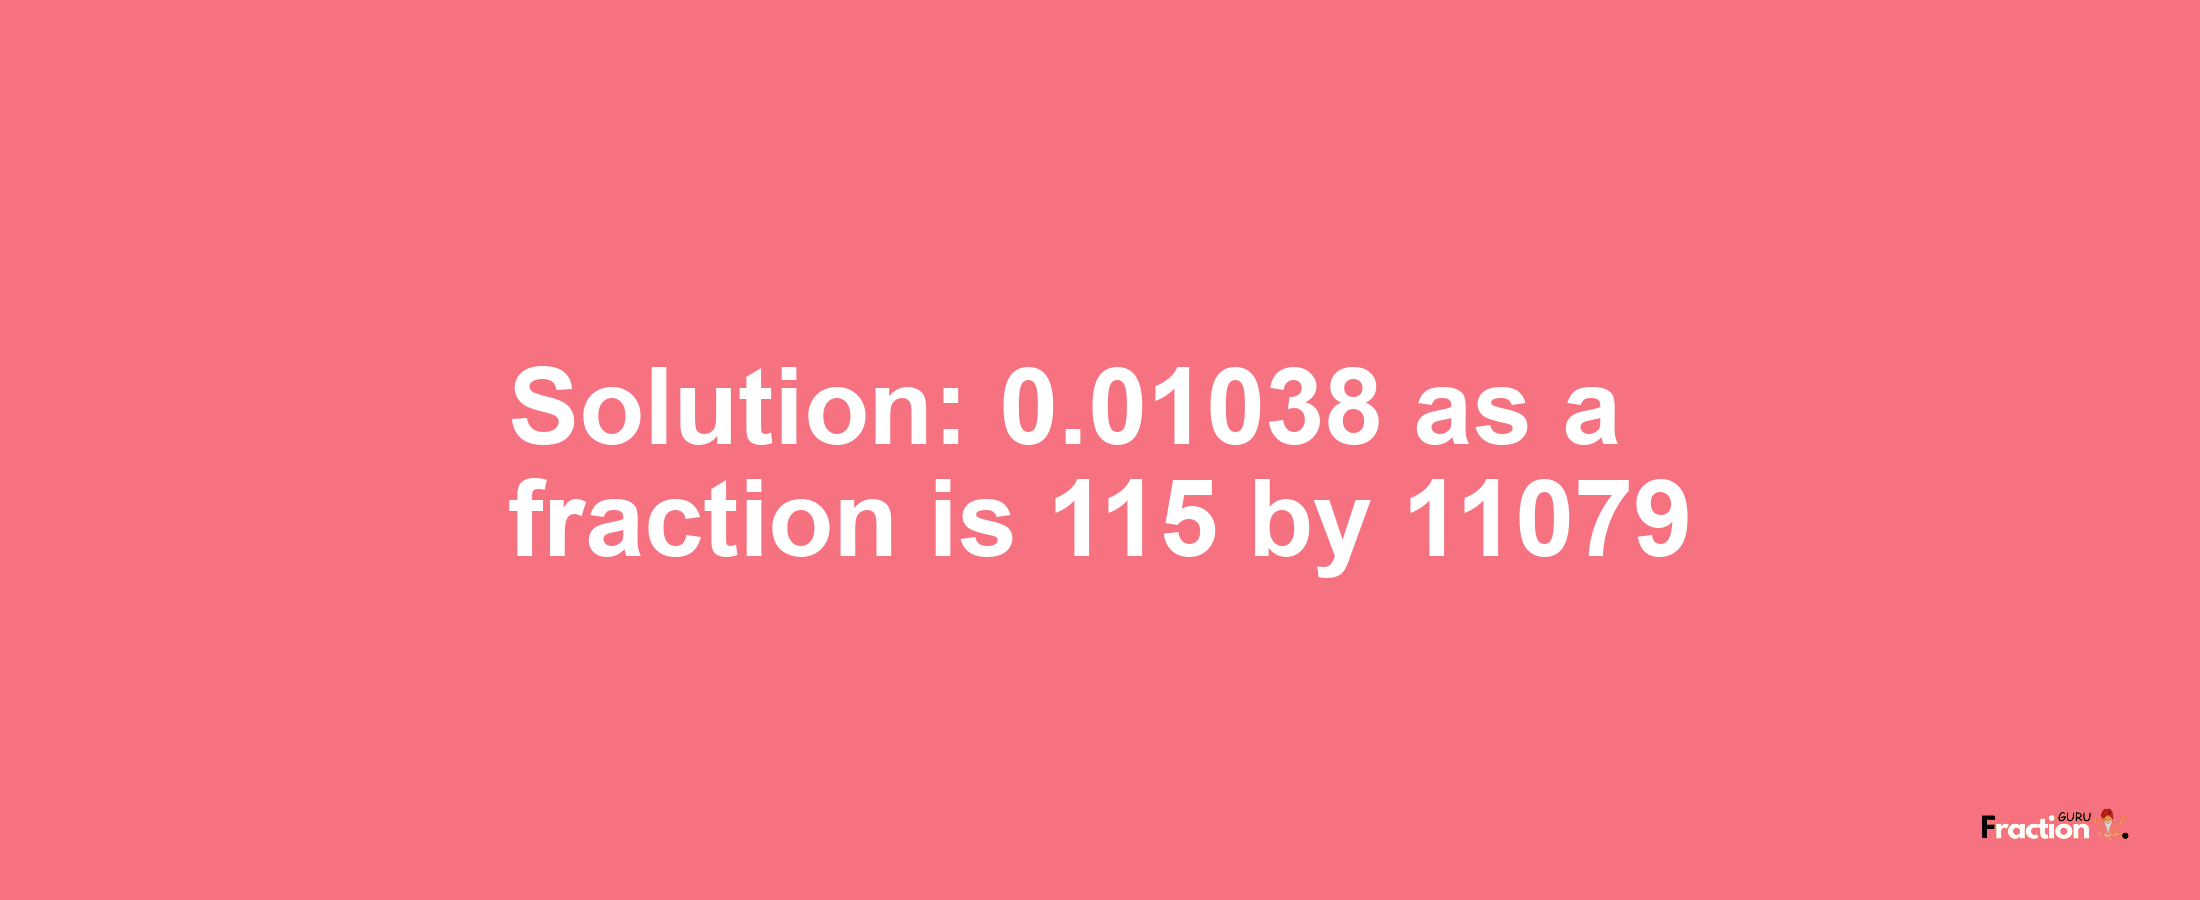 Solution:0.01038 as a fraction is 115/11079